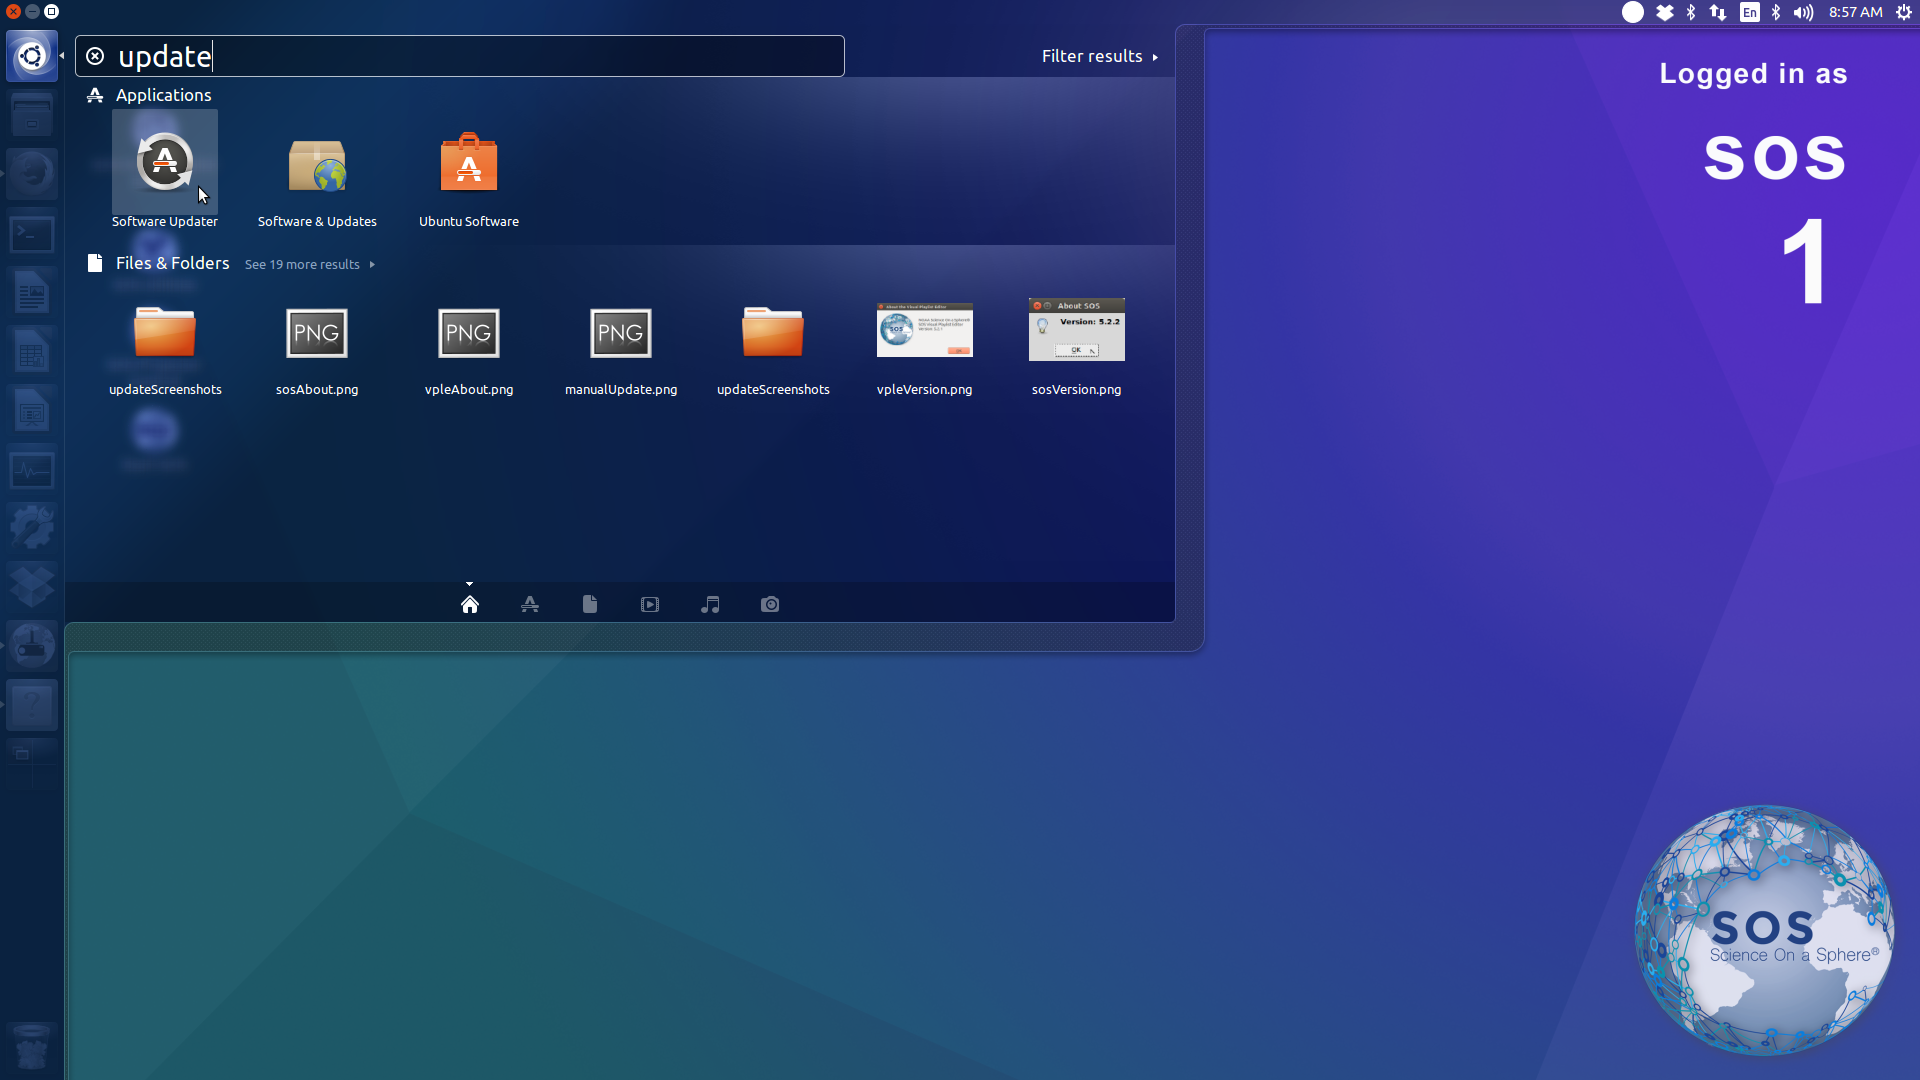 Ubuntu lists Software Updater under Applications when you search for update